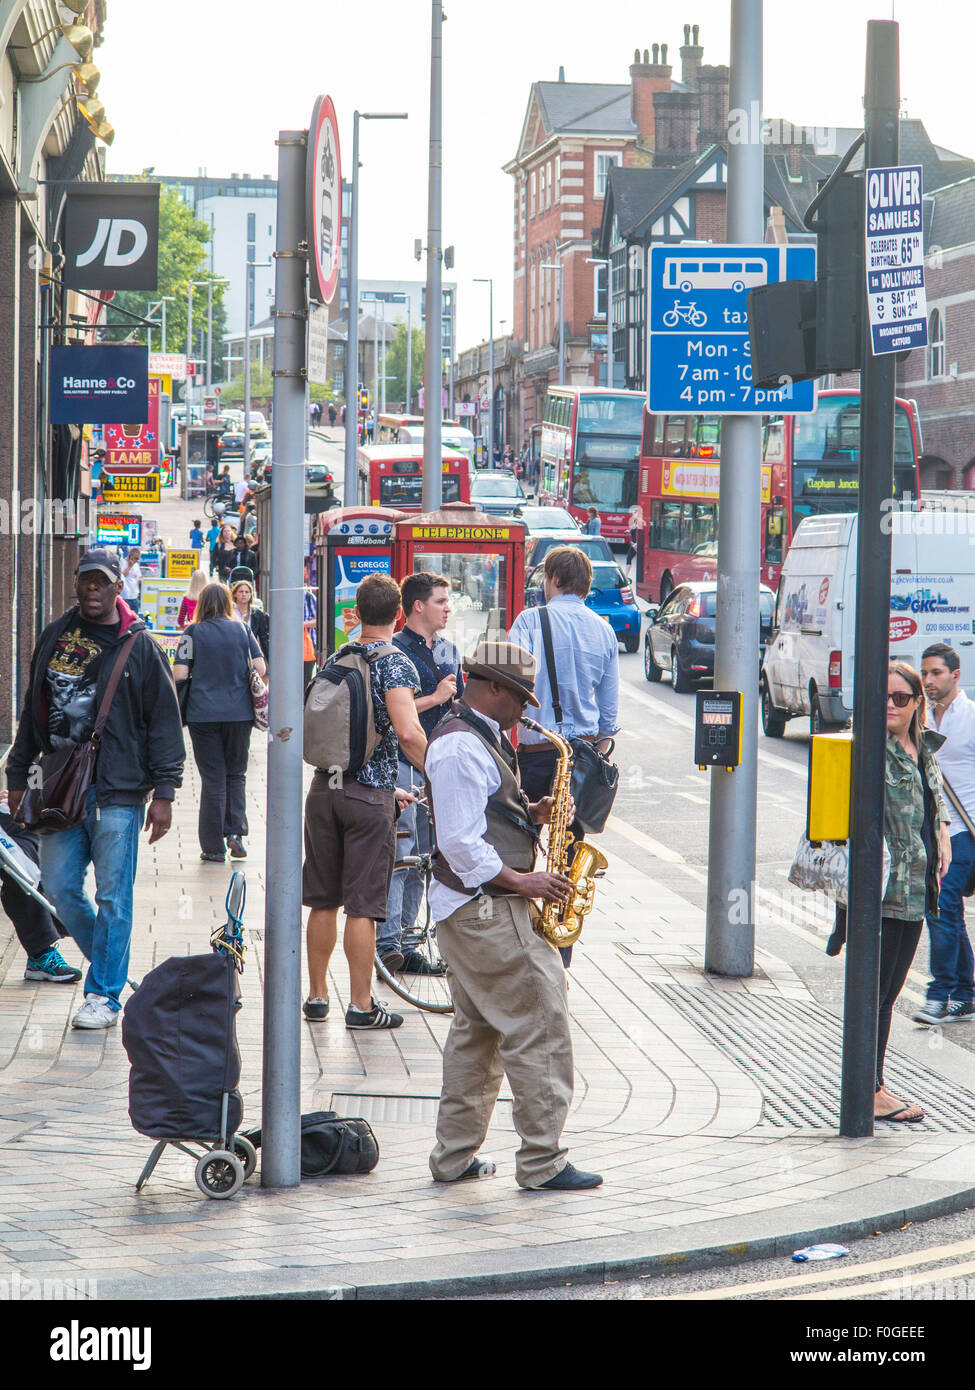 A saxophonist busks in the streets of London Stock Photo